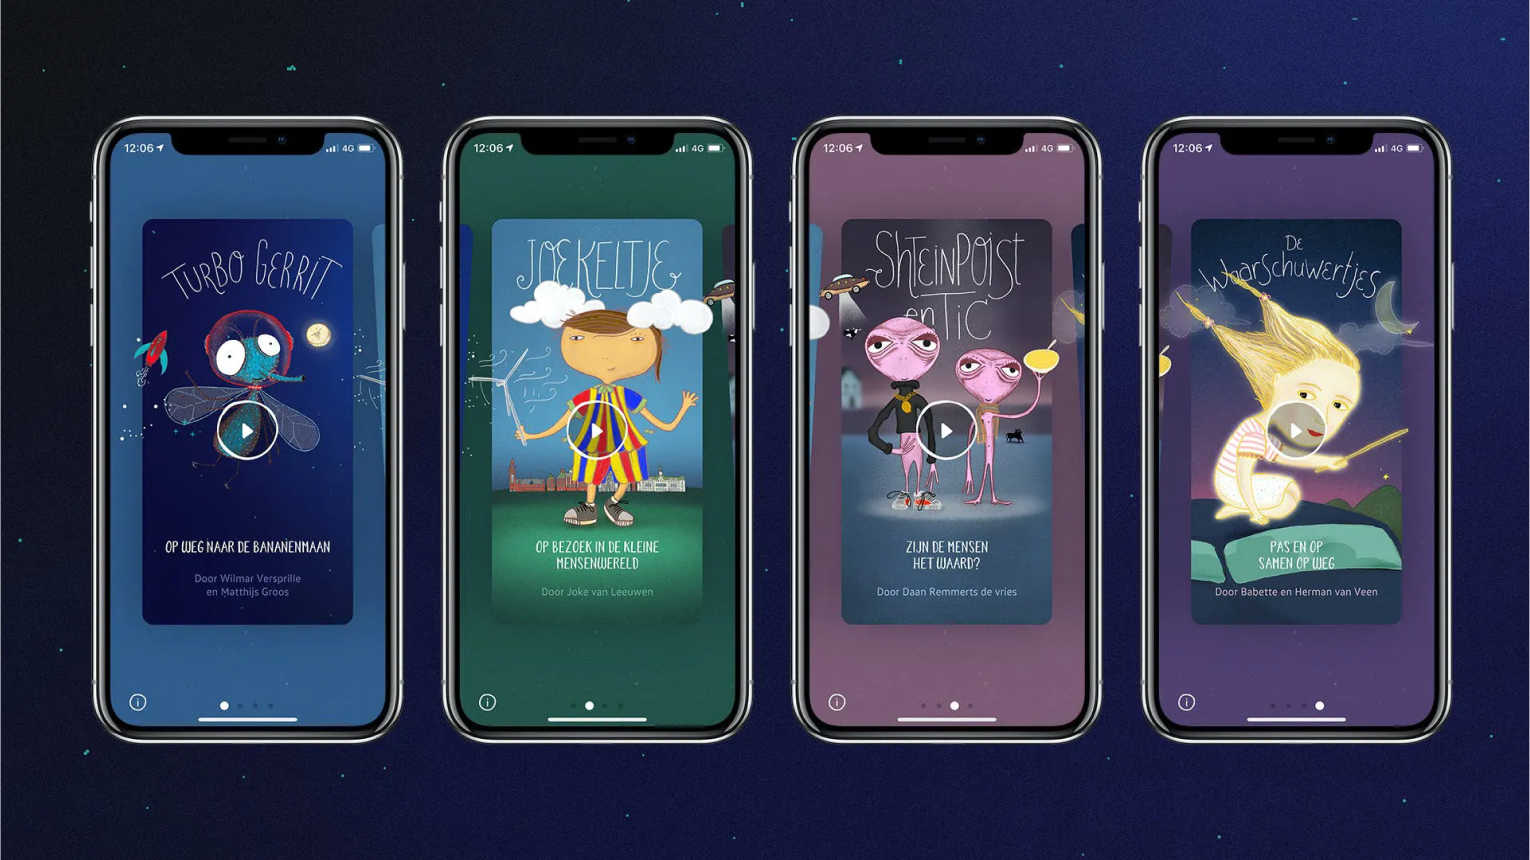 Characters from the audiobook shown on a mobile phone